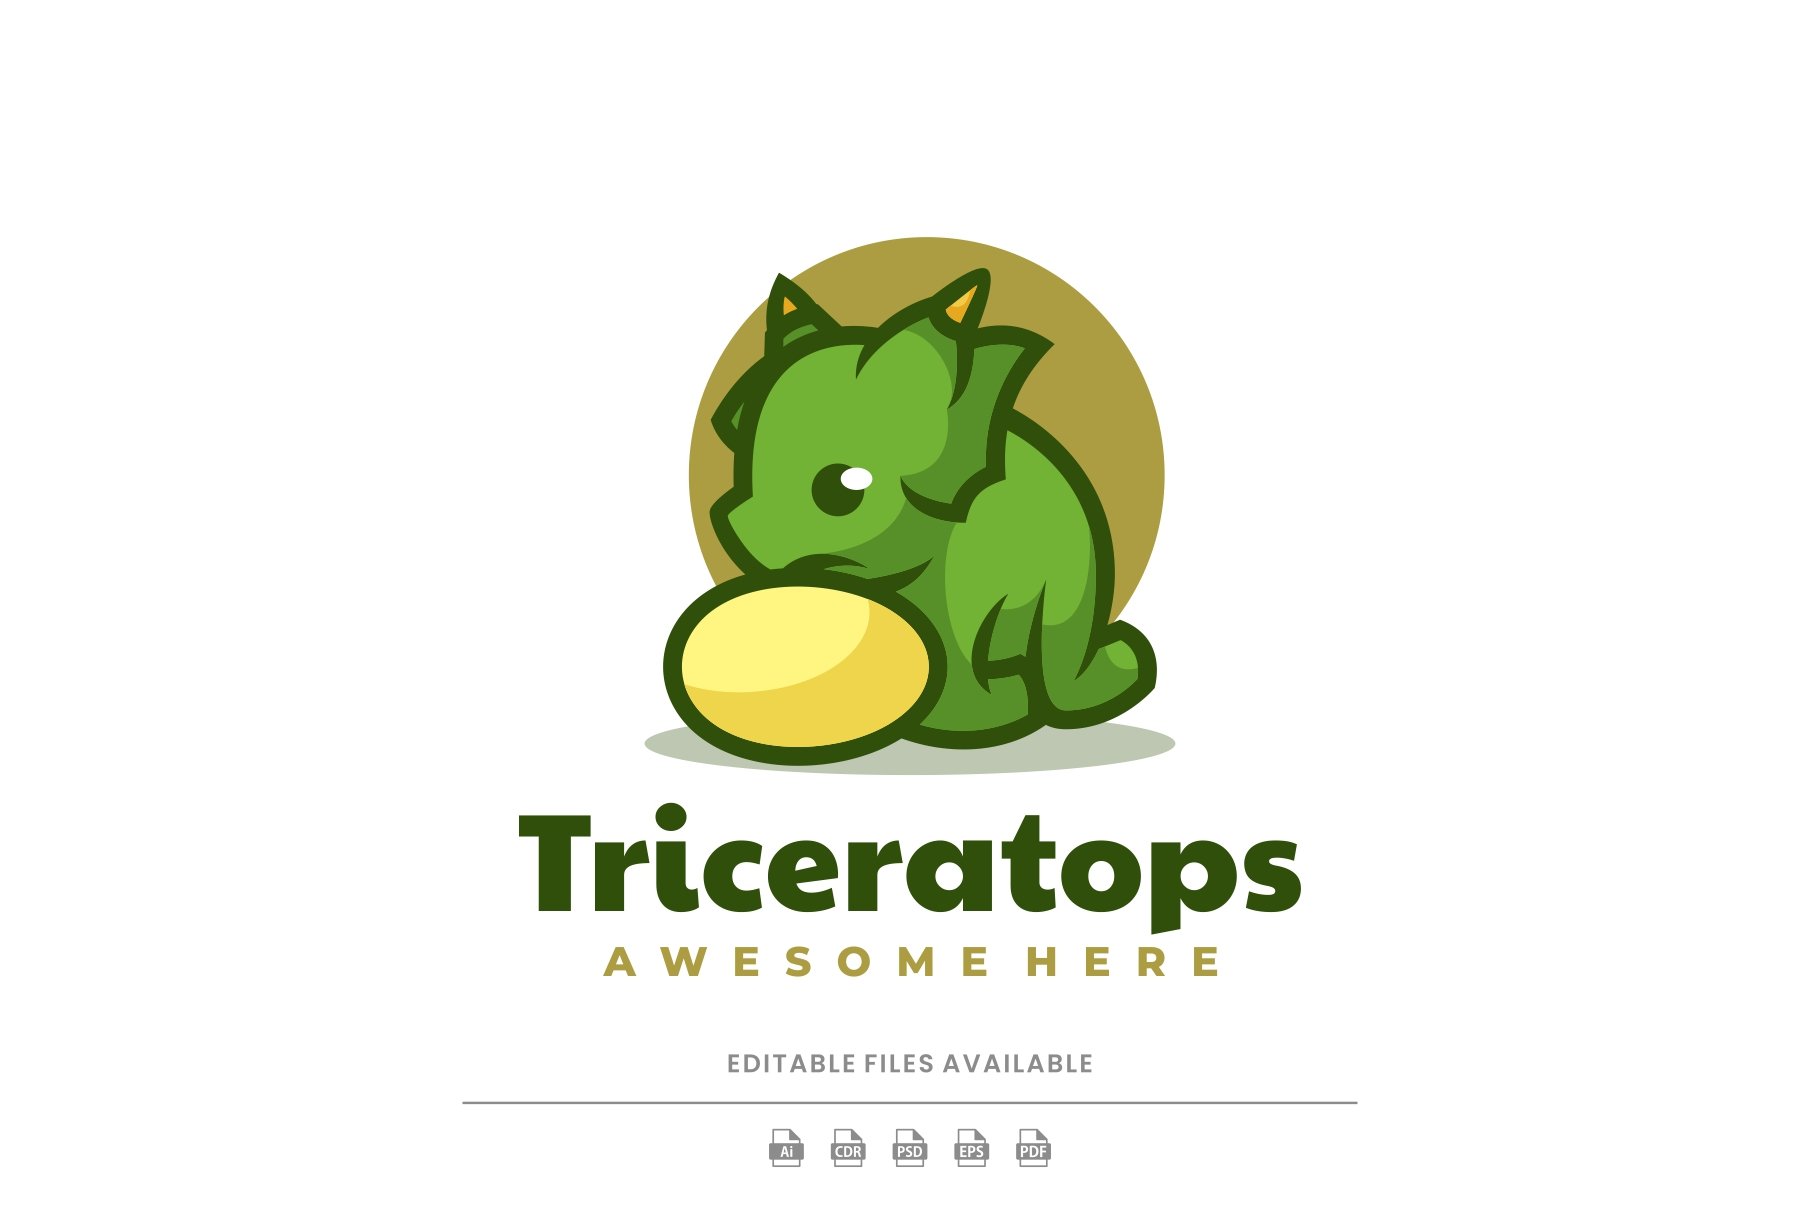 Triceratops Simple Mascot Logo cover image.